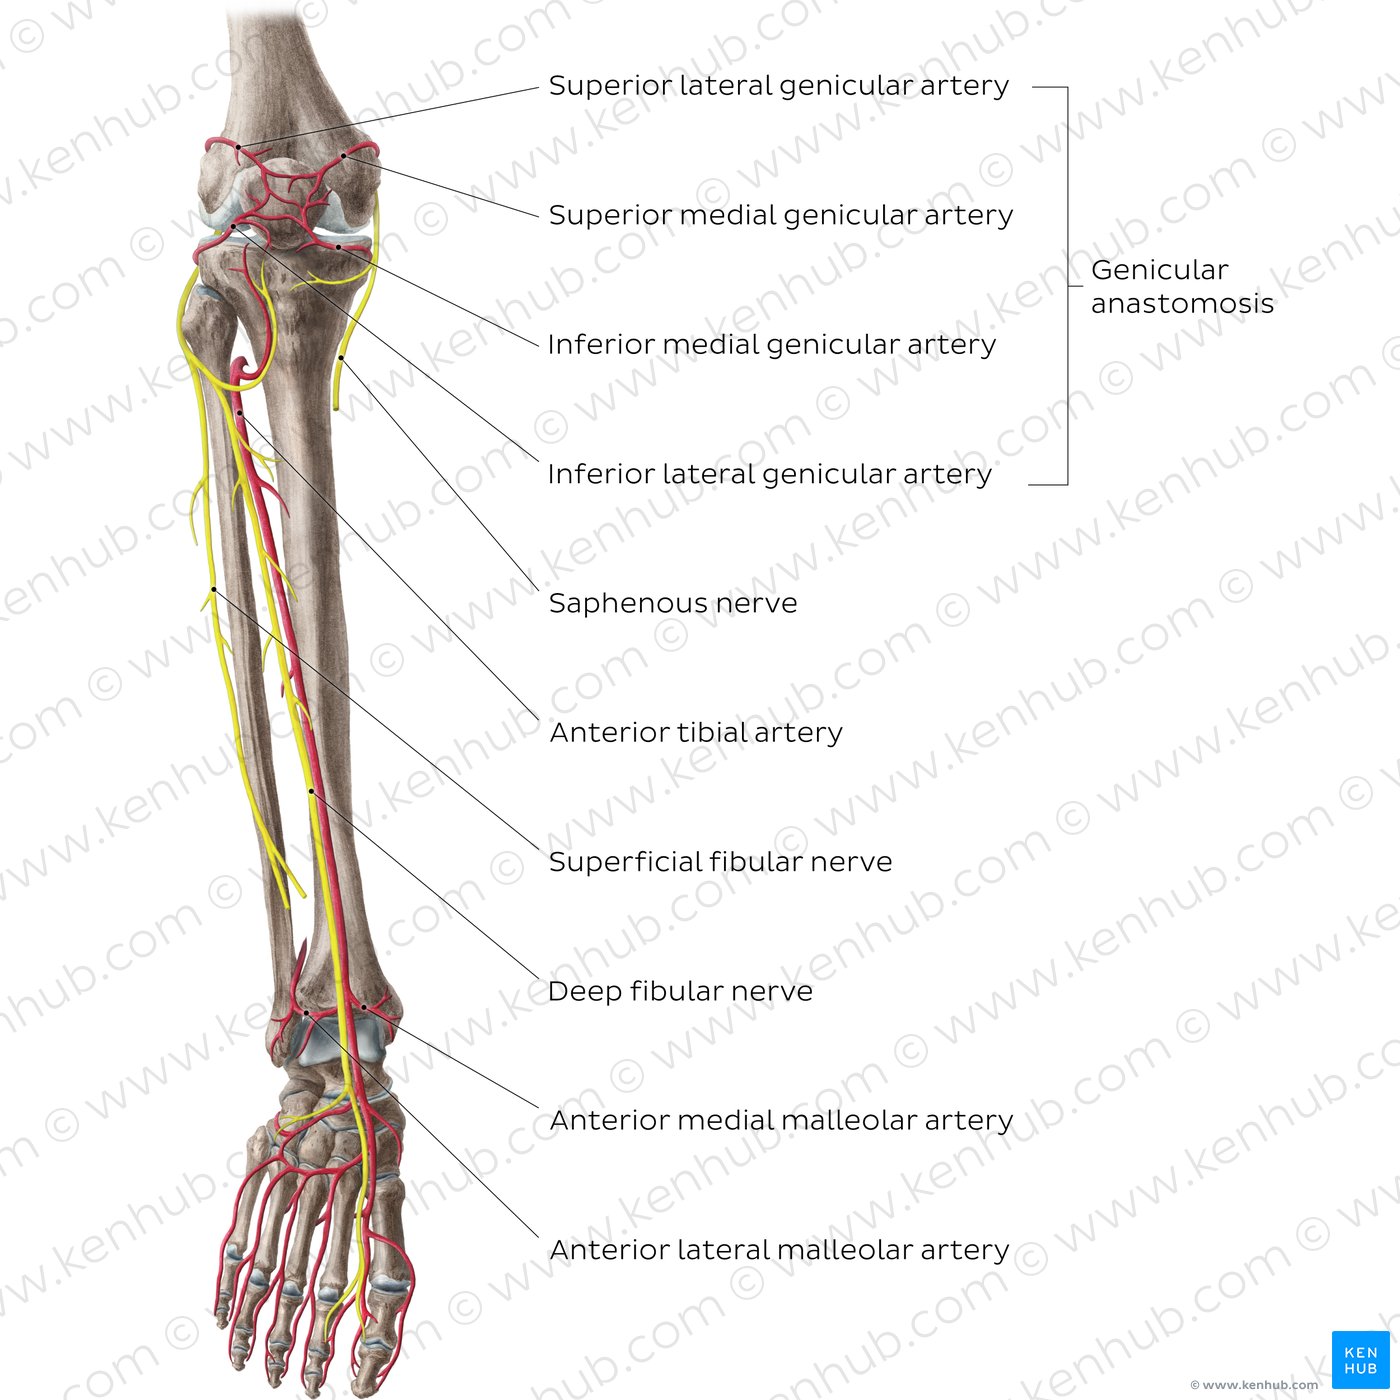 Arteries and nerves of the knee and leg (anterior view)